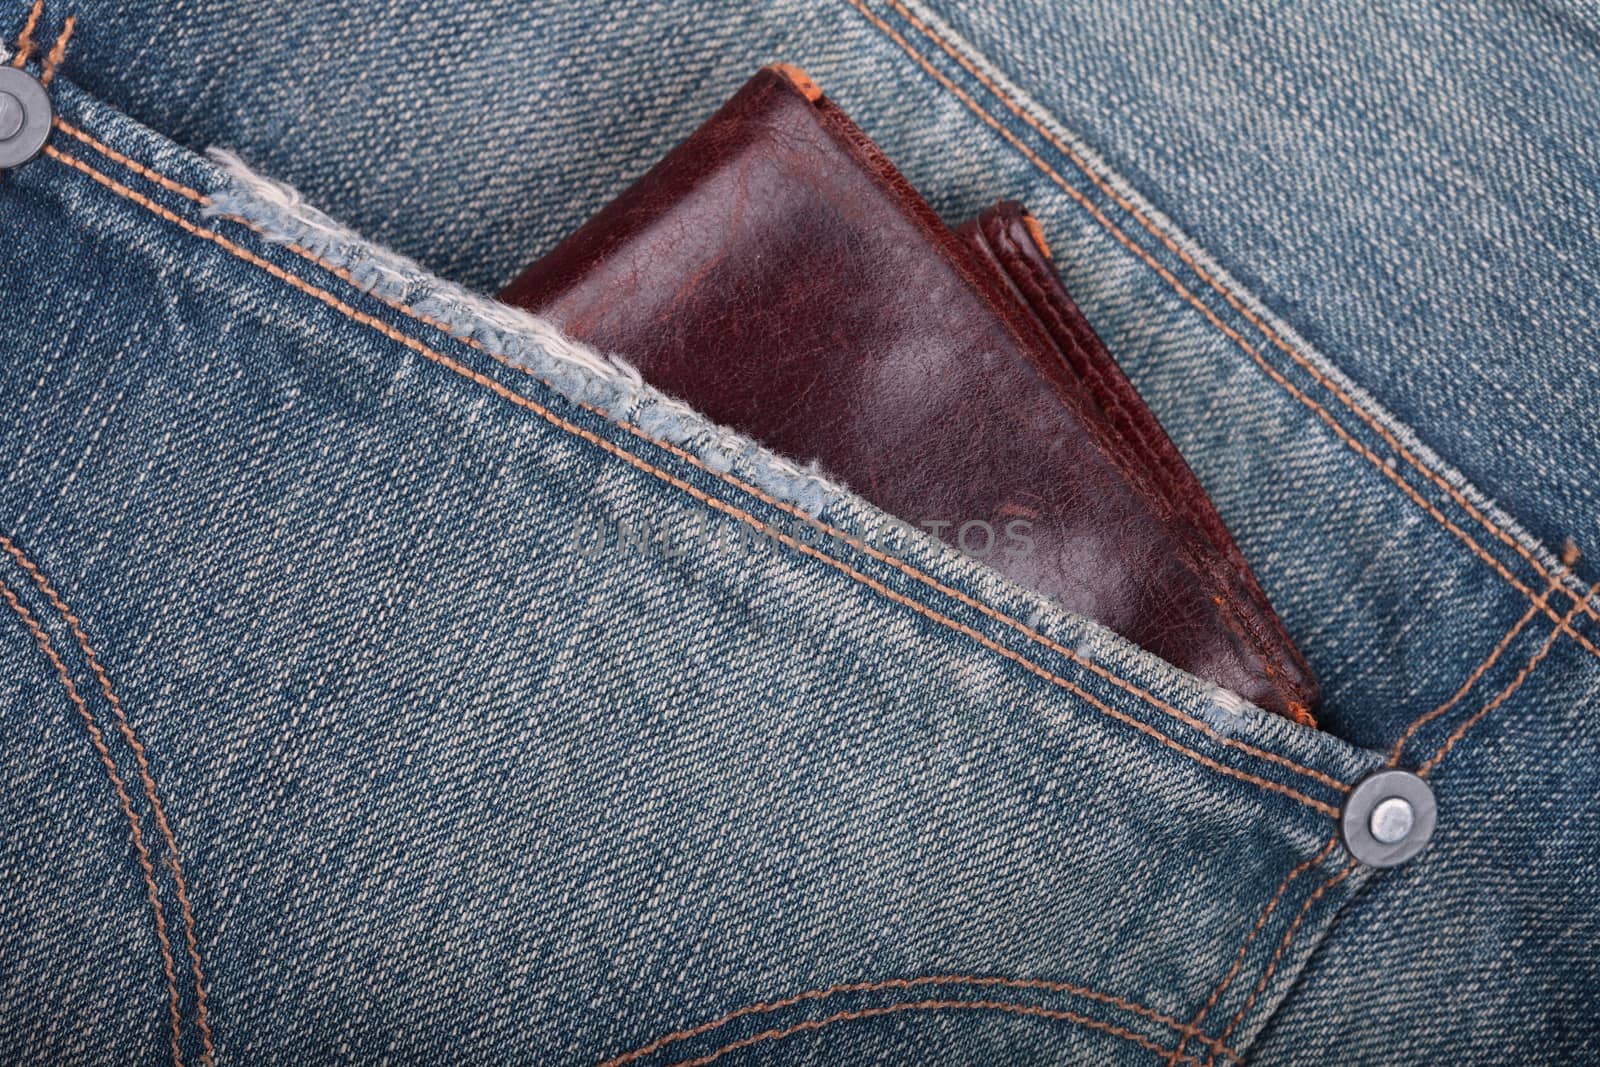 wallet on a pocket of jeans